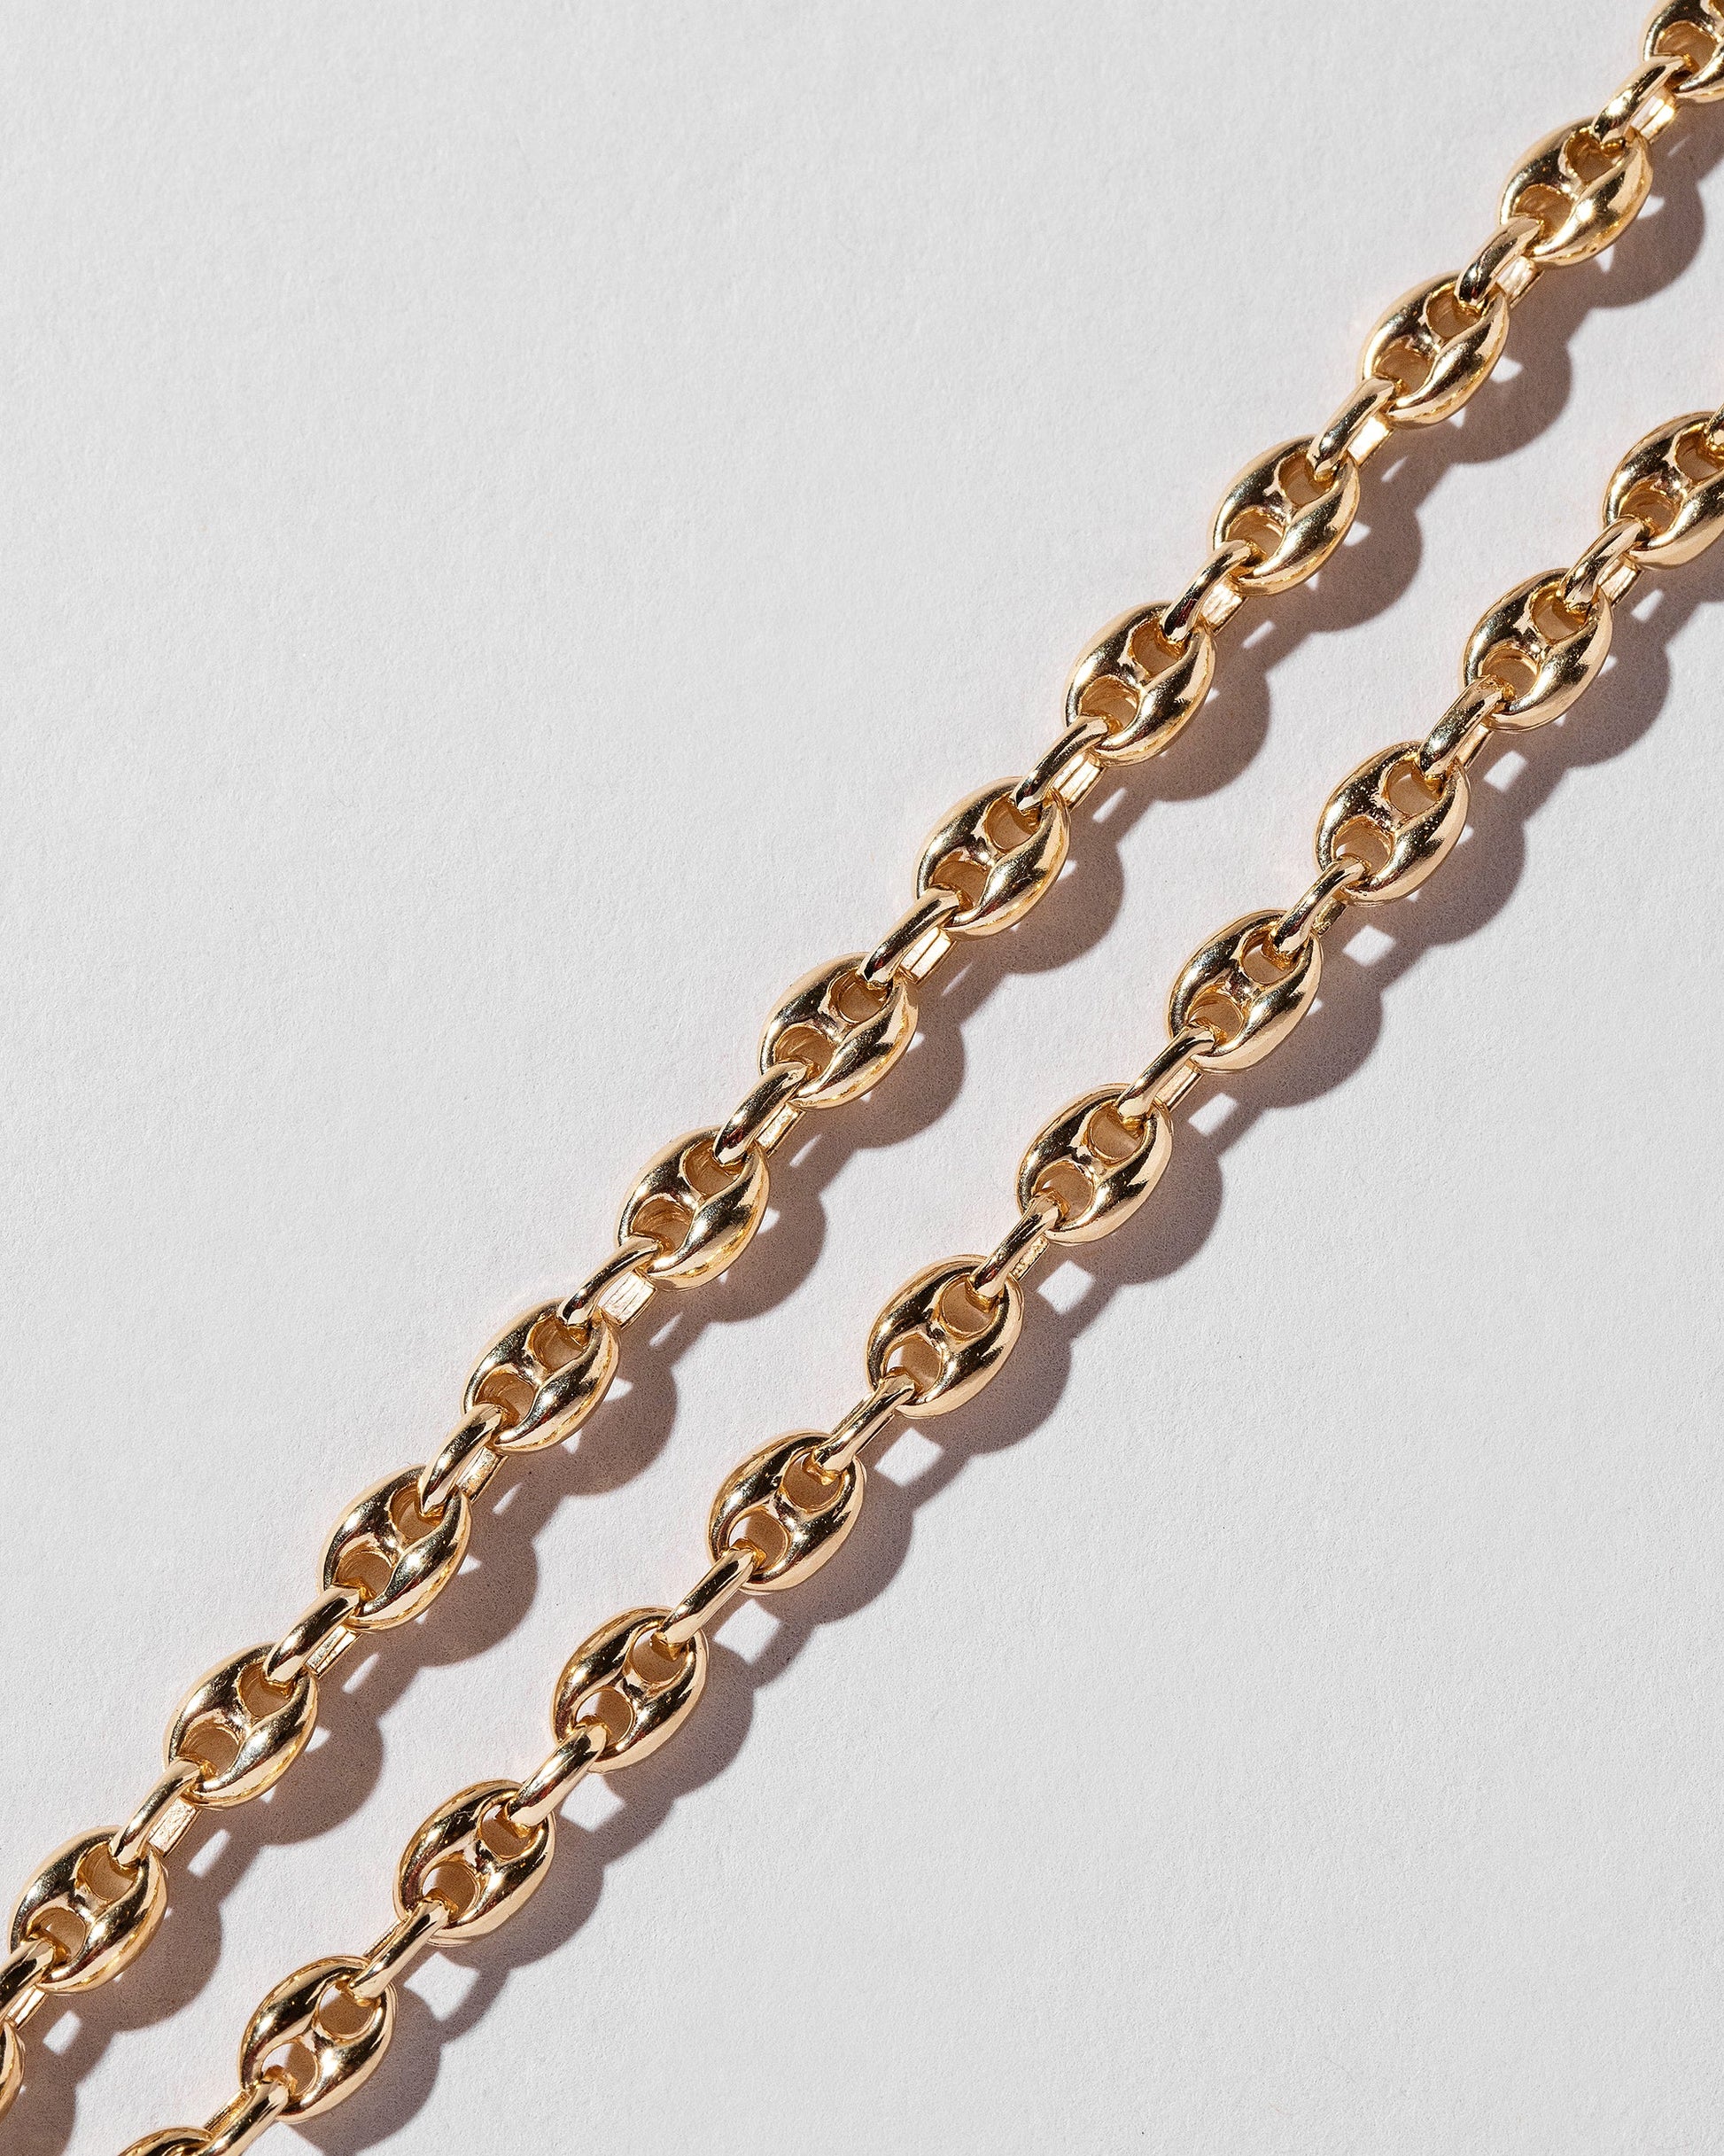 Closeup details of the Segmented Chain Necklaces on light color background.